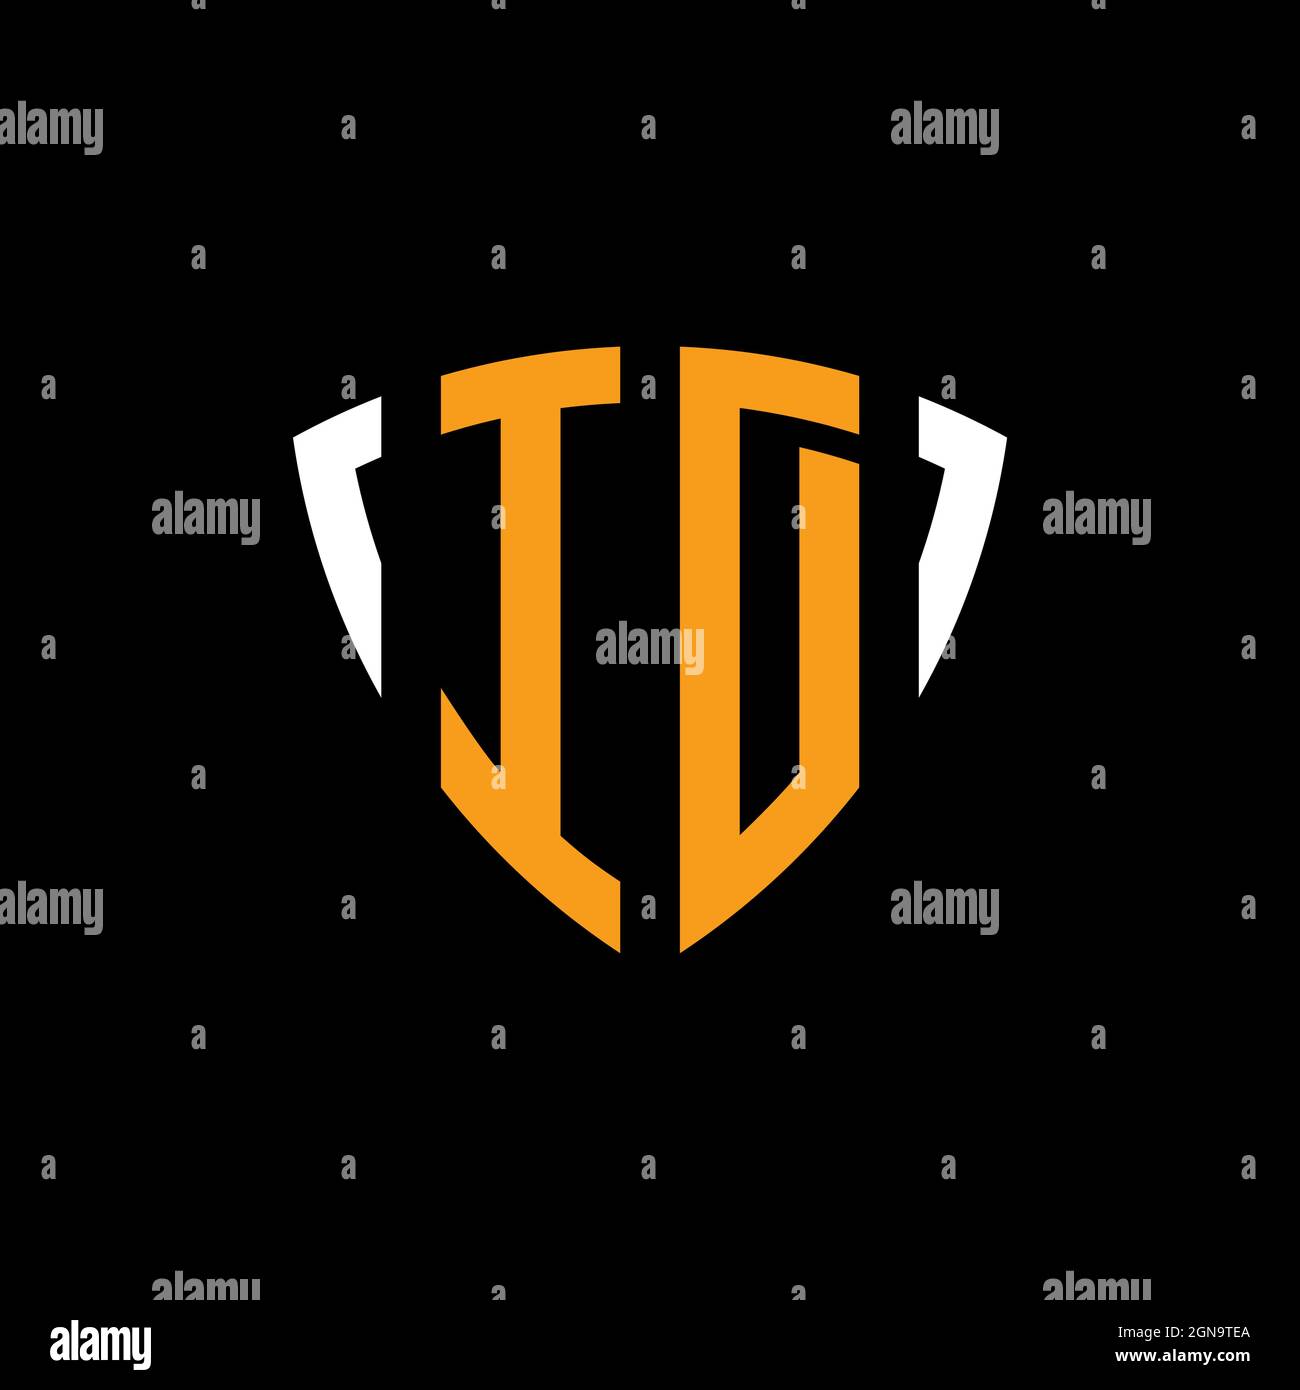 ID logo with shield white orange shape design template isolated on black background Stock Vector